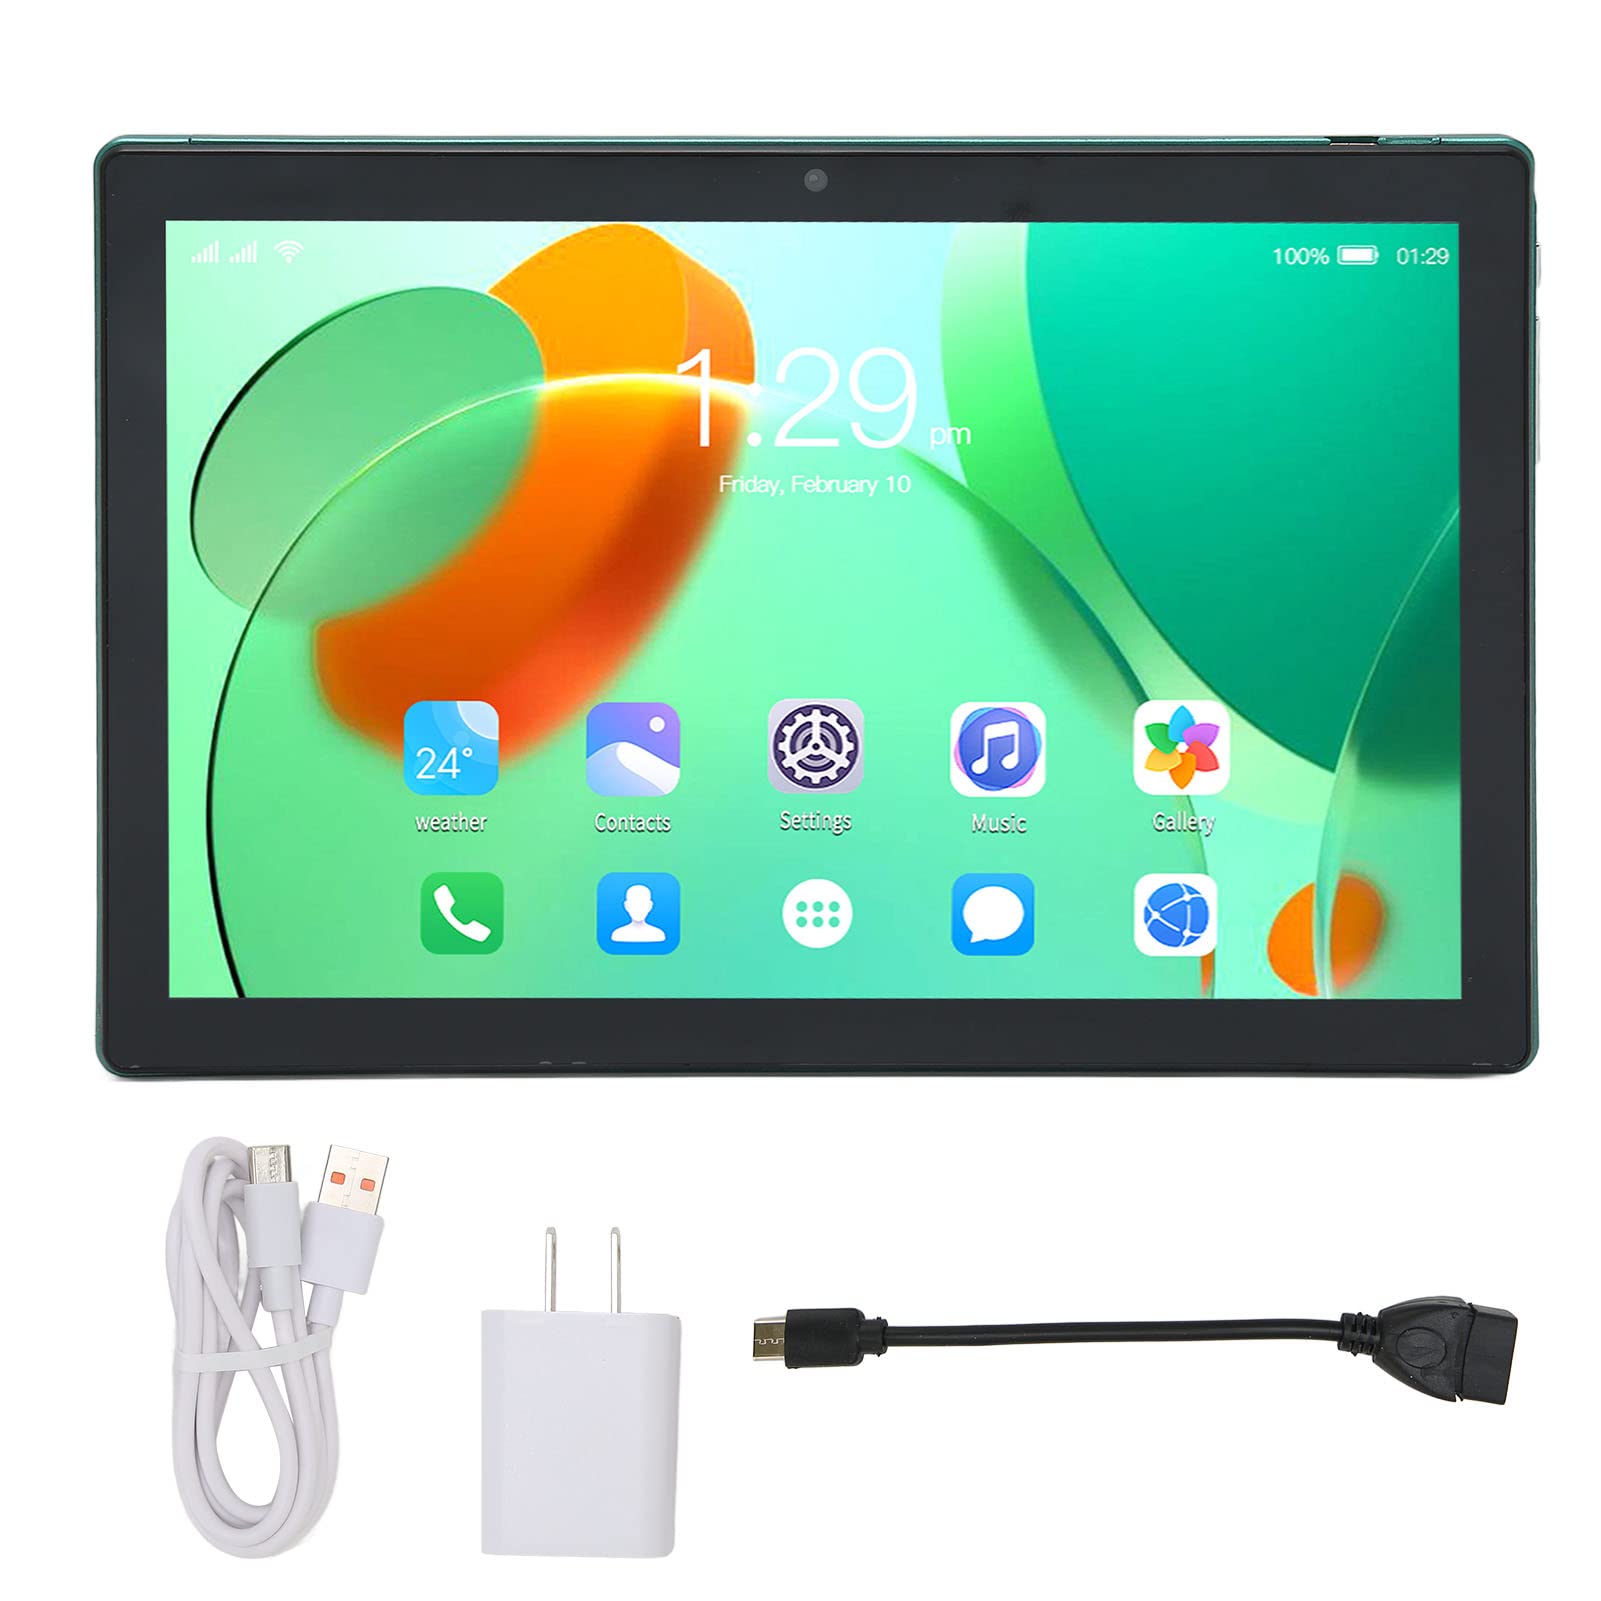 Pomya 10.1 Inch FHD Tablet, 5G WiFi Tablet for Android12, 8GB RAM 256GB ROM, 4G LTE Calling Tablet with 8MP 16MP Camera, 7000mAh Type C Octa Core Tablet for Daily Use